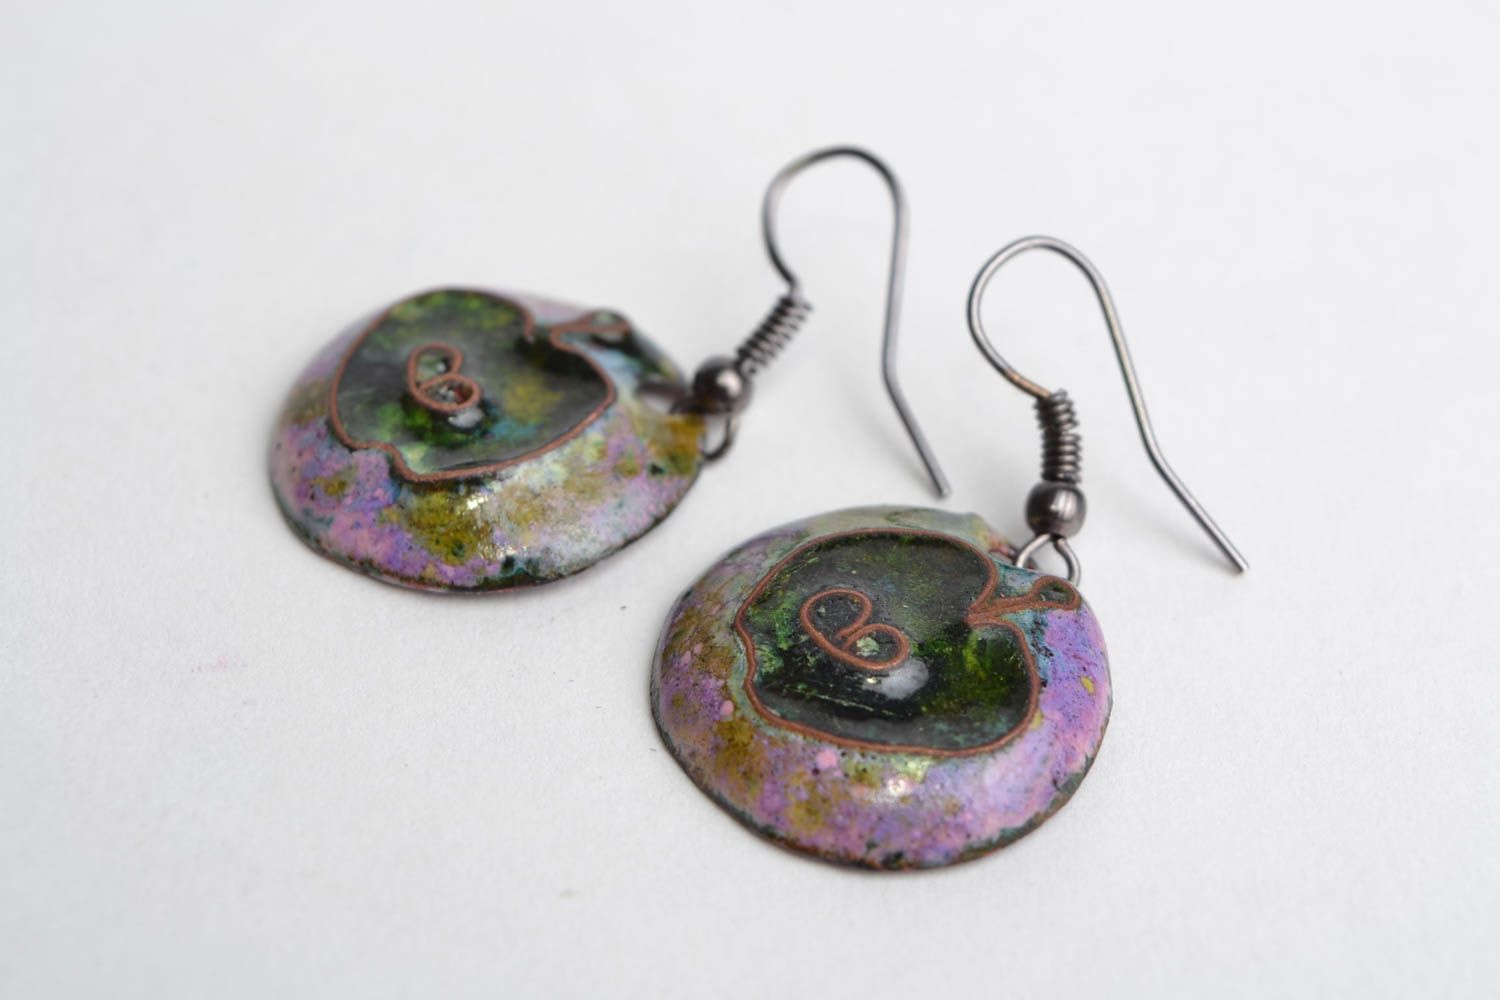 Handmade round violet enameled copper dangling earrings with apples images photo 3